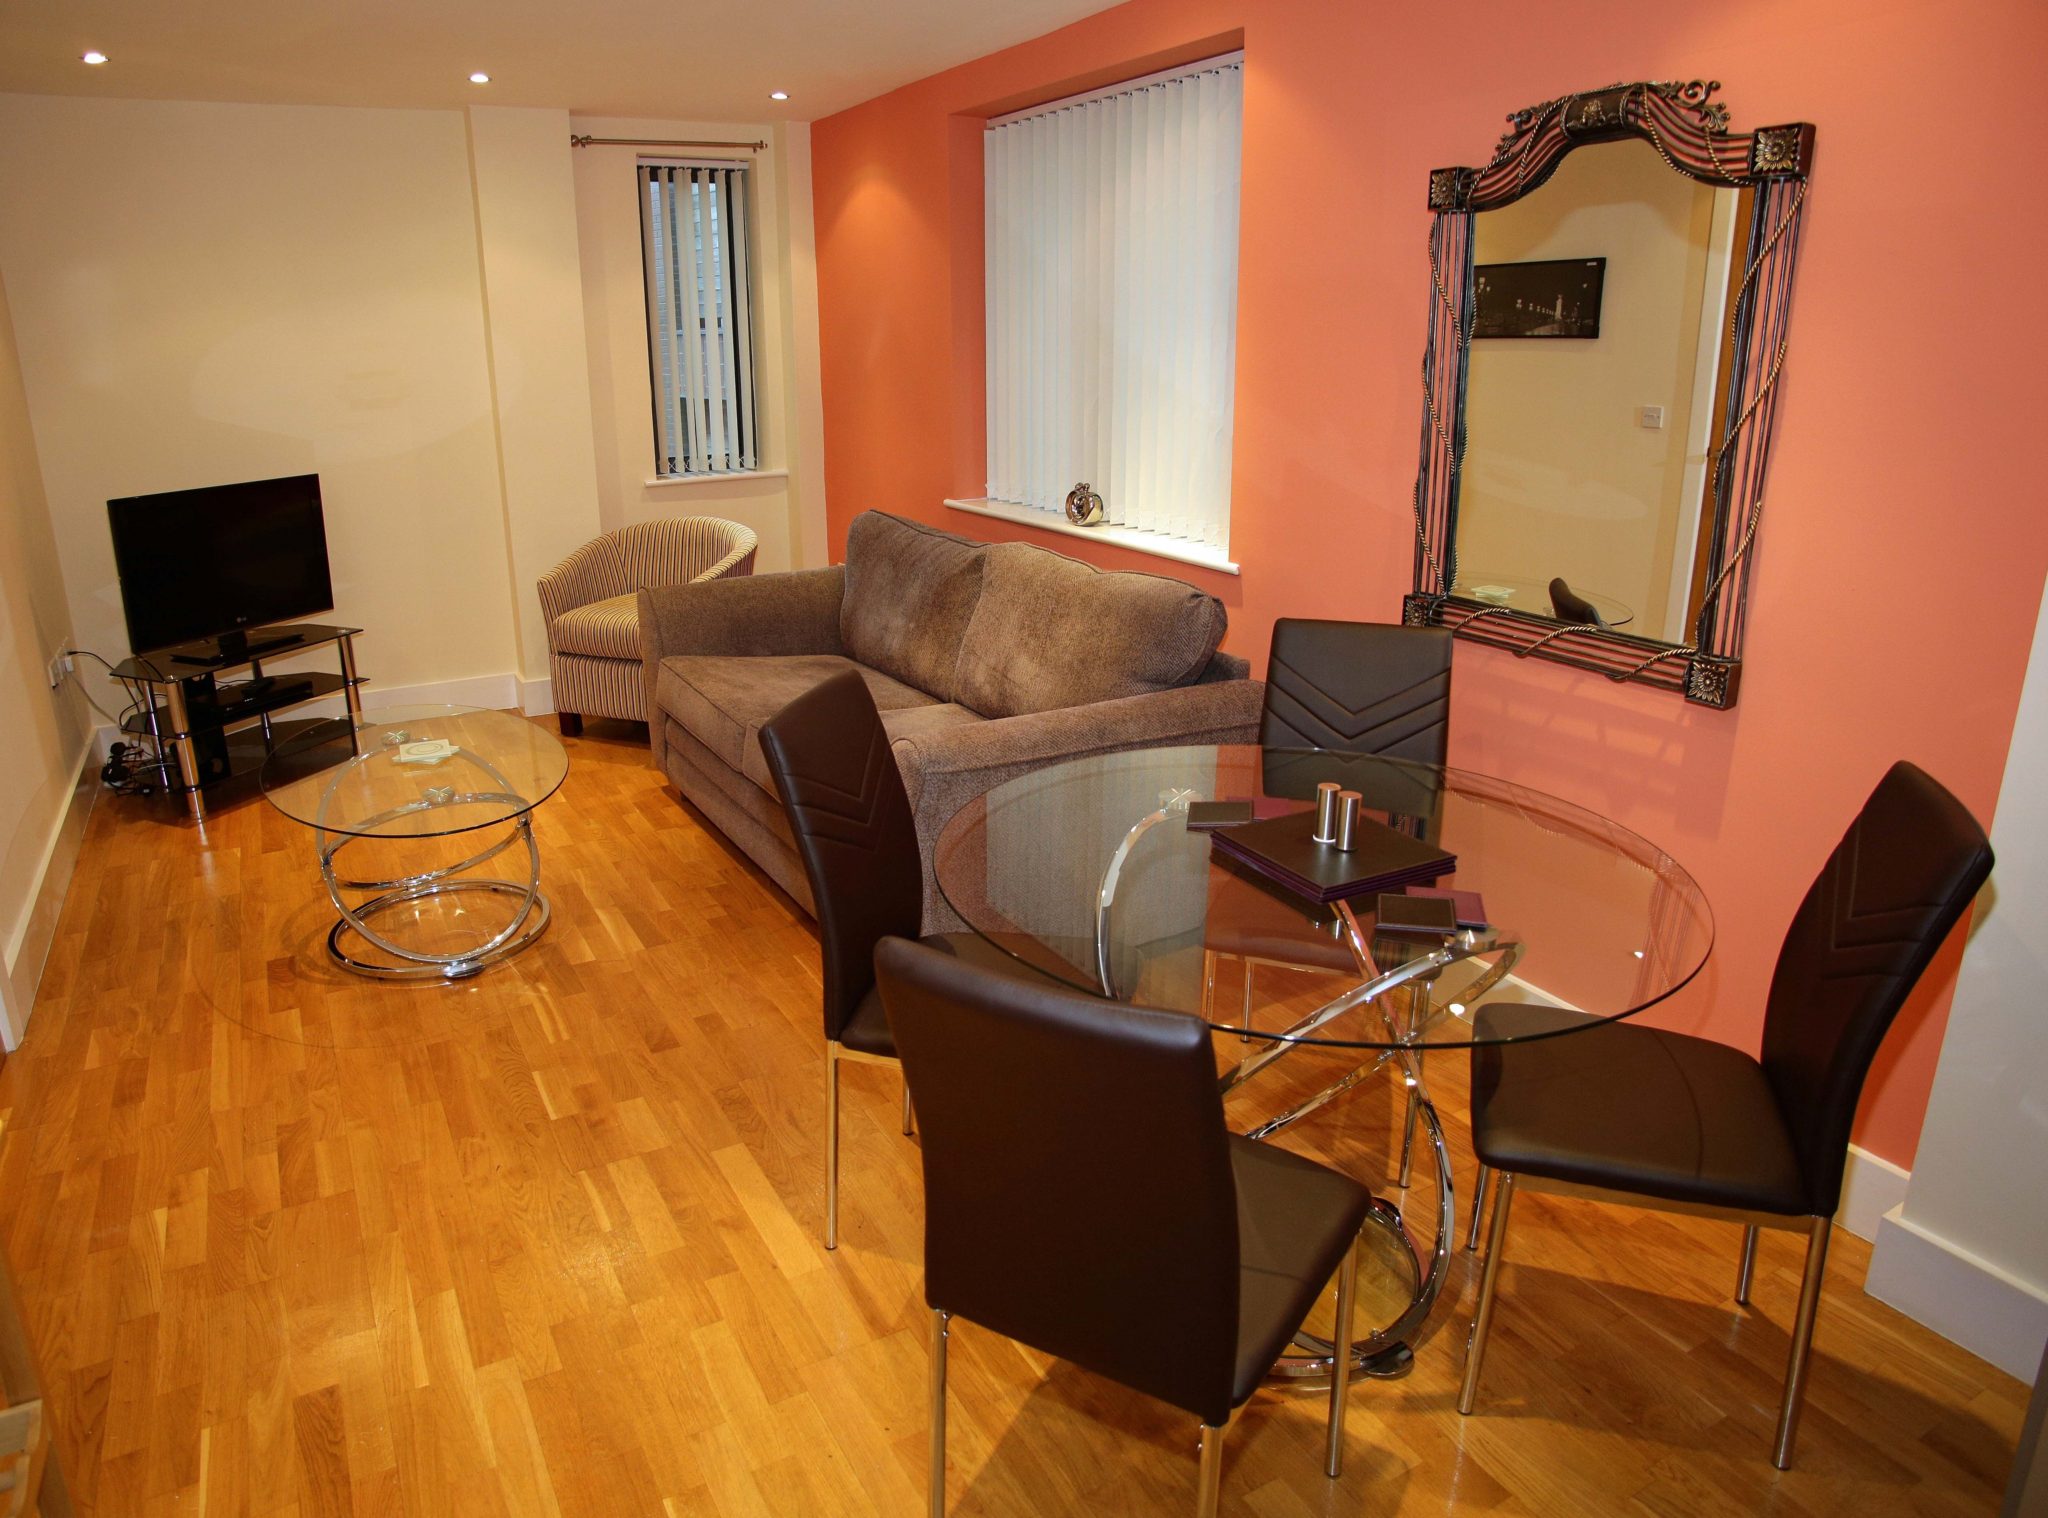 Luxury-Accommodation-Newcastle-UK-available-from-today!-Book-quality-corporate-Serviced-Apartments-in-Central-Newcastle-today!-30%-Cheaper-than-a-Hotel!-Urban-Stay